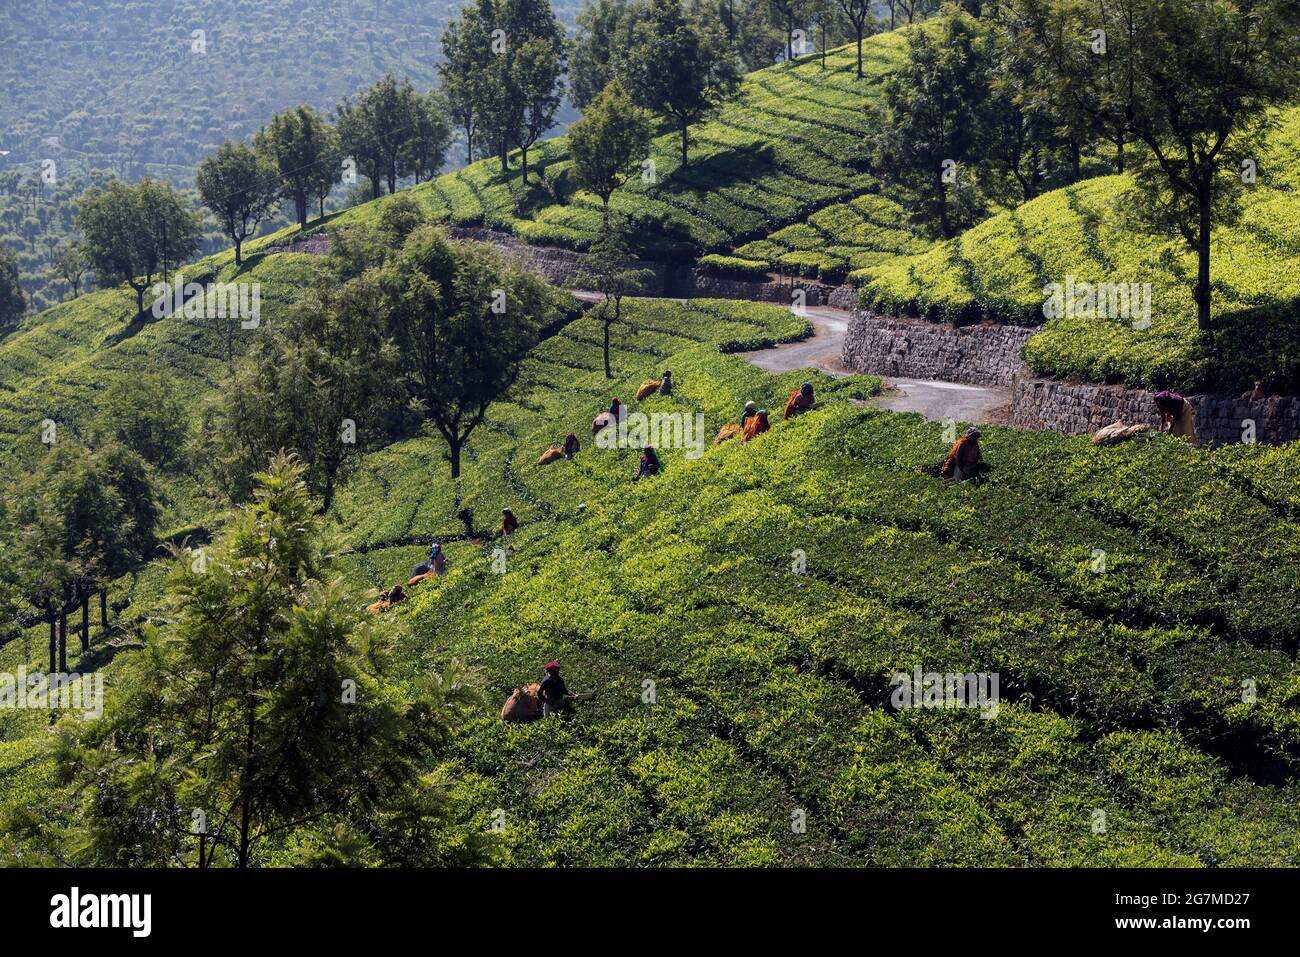 The tea plantations around Ootacamund (Ooty)/ Udagamandalam in India's southern state ofTamil Nadu form mesmerizing patterns against the backdrop of t Stock Photo